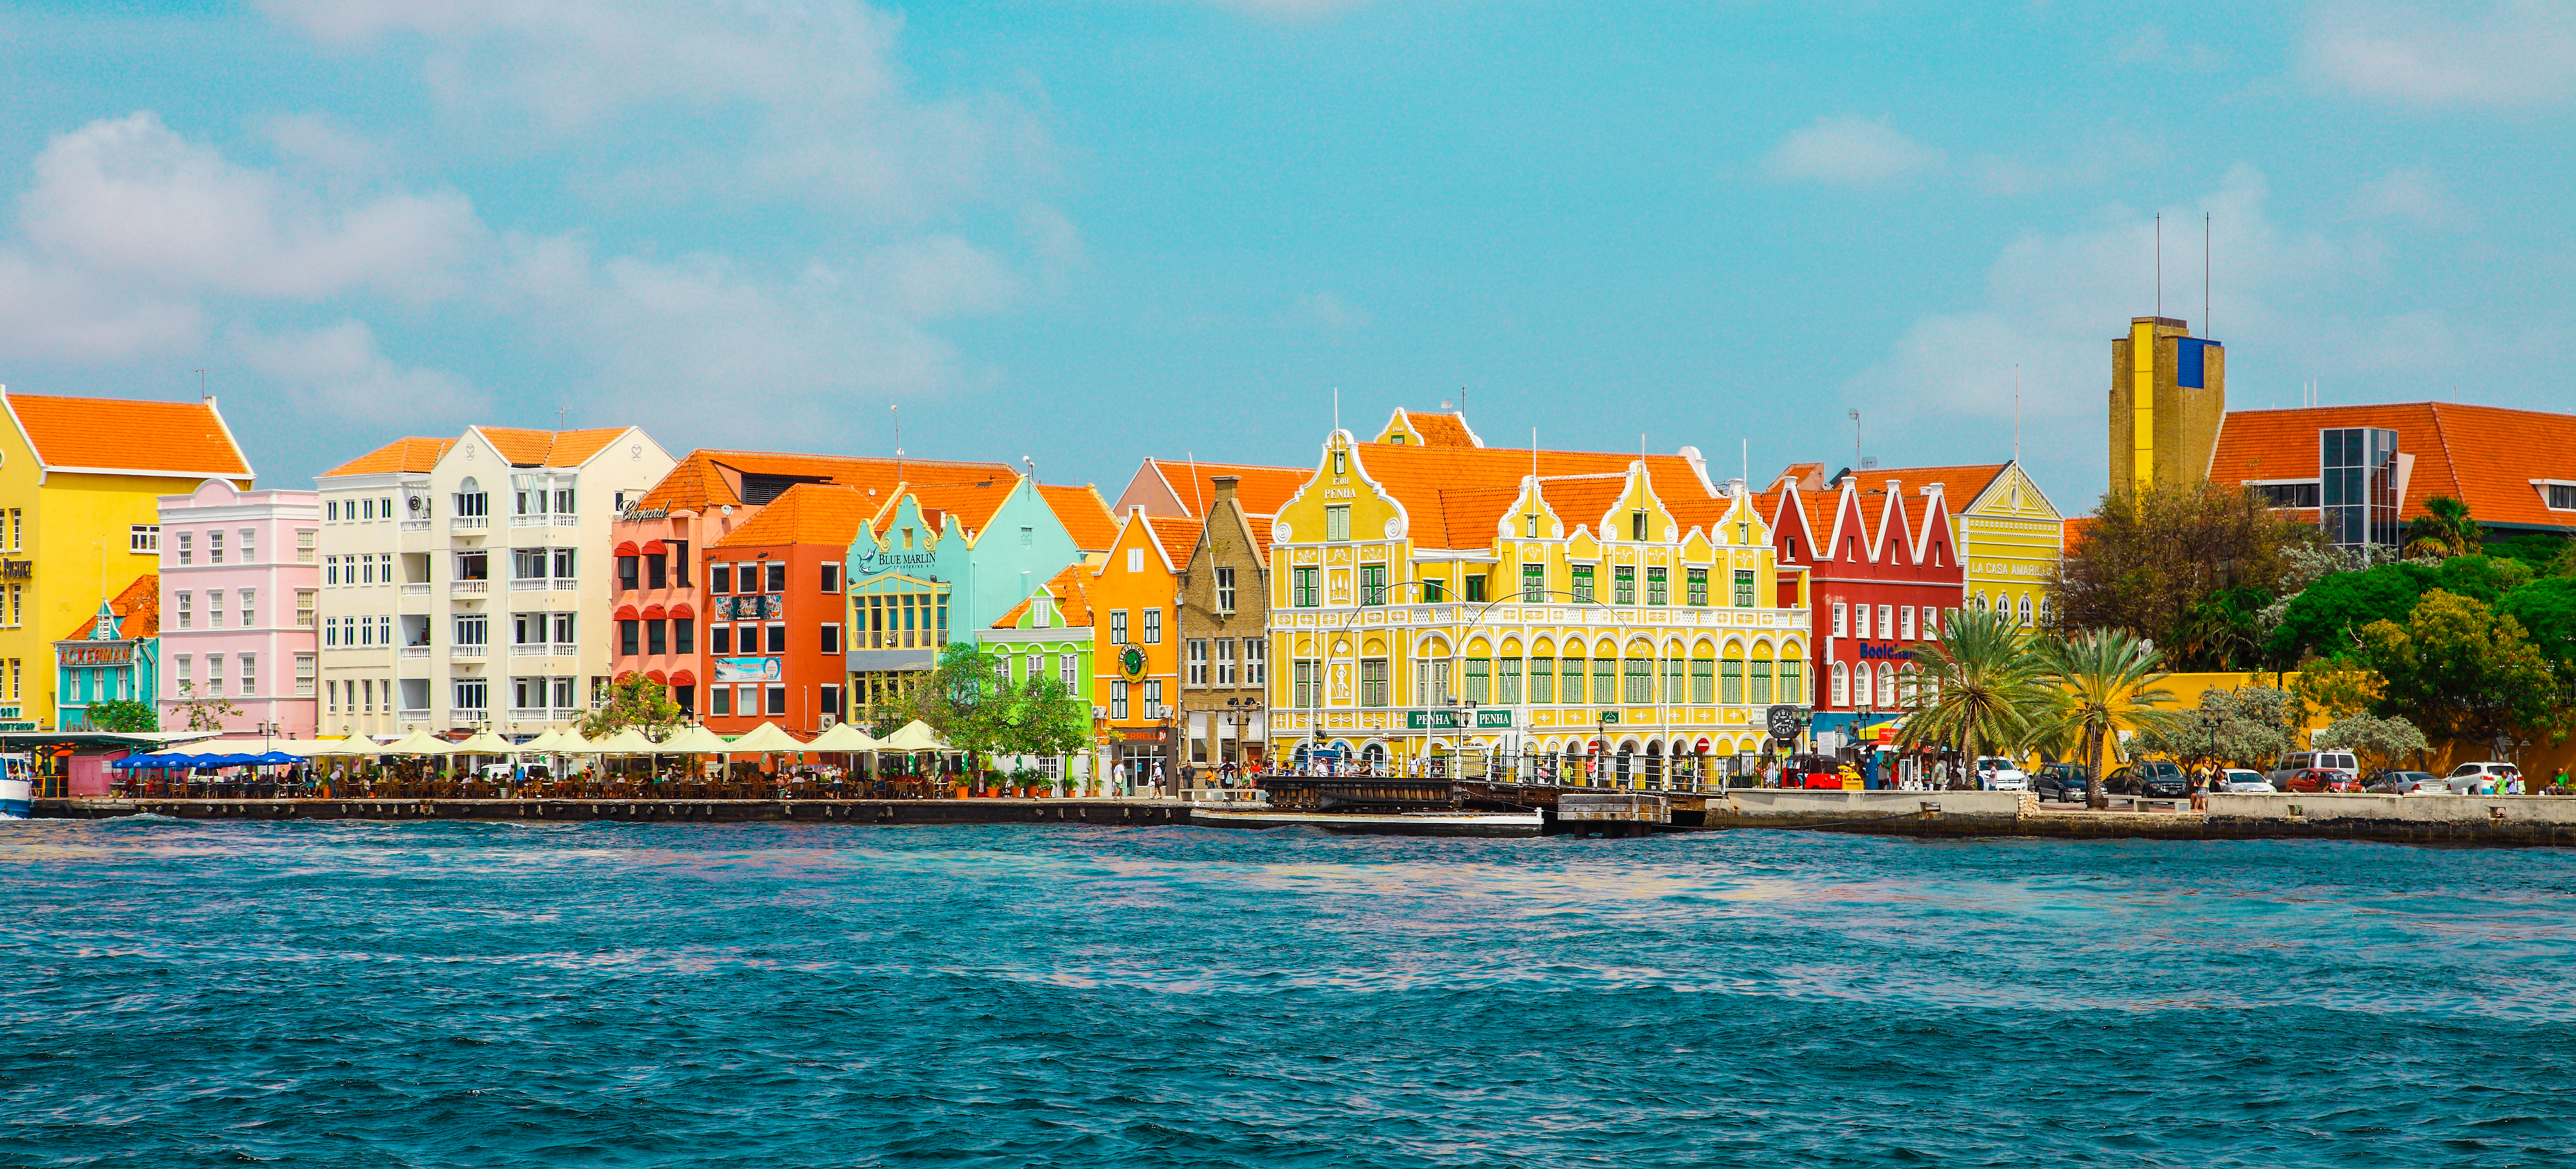 Make Memories with Your Family During an Amazing Vacation in Curacao - Willemstad Curacao